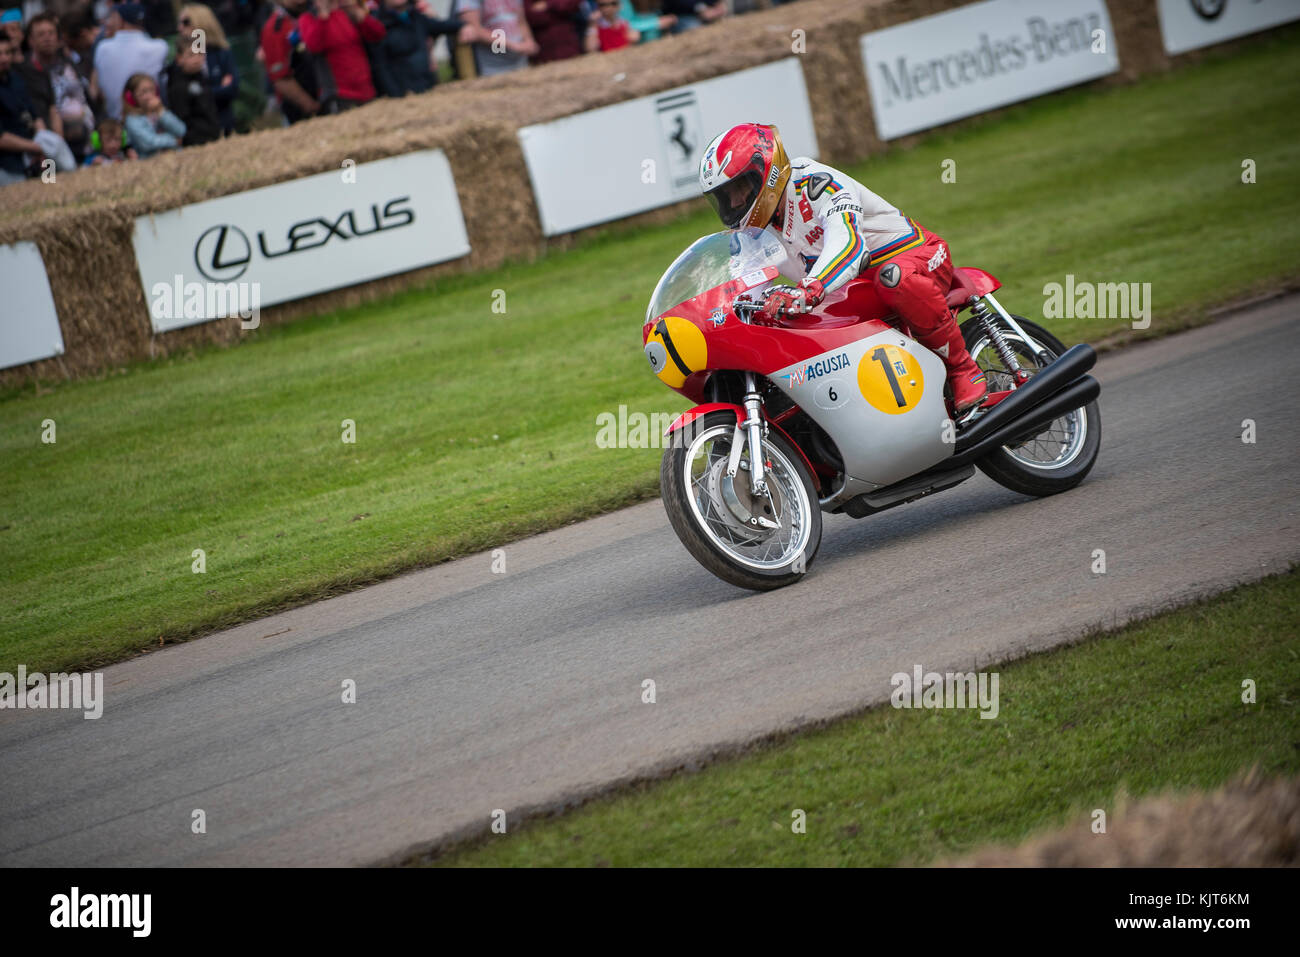 Goodwood Festival of Speed Banque D'Images